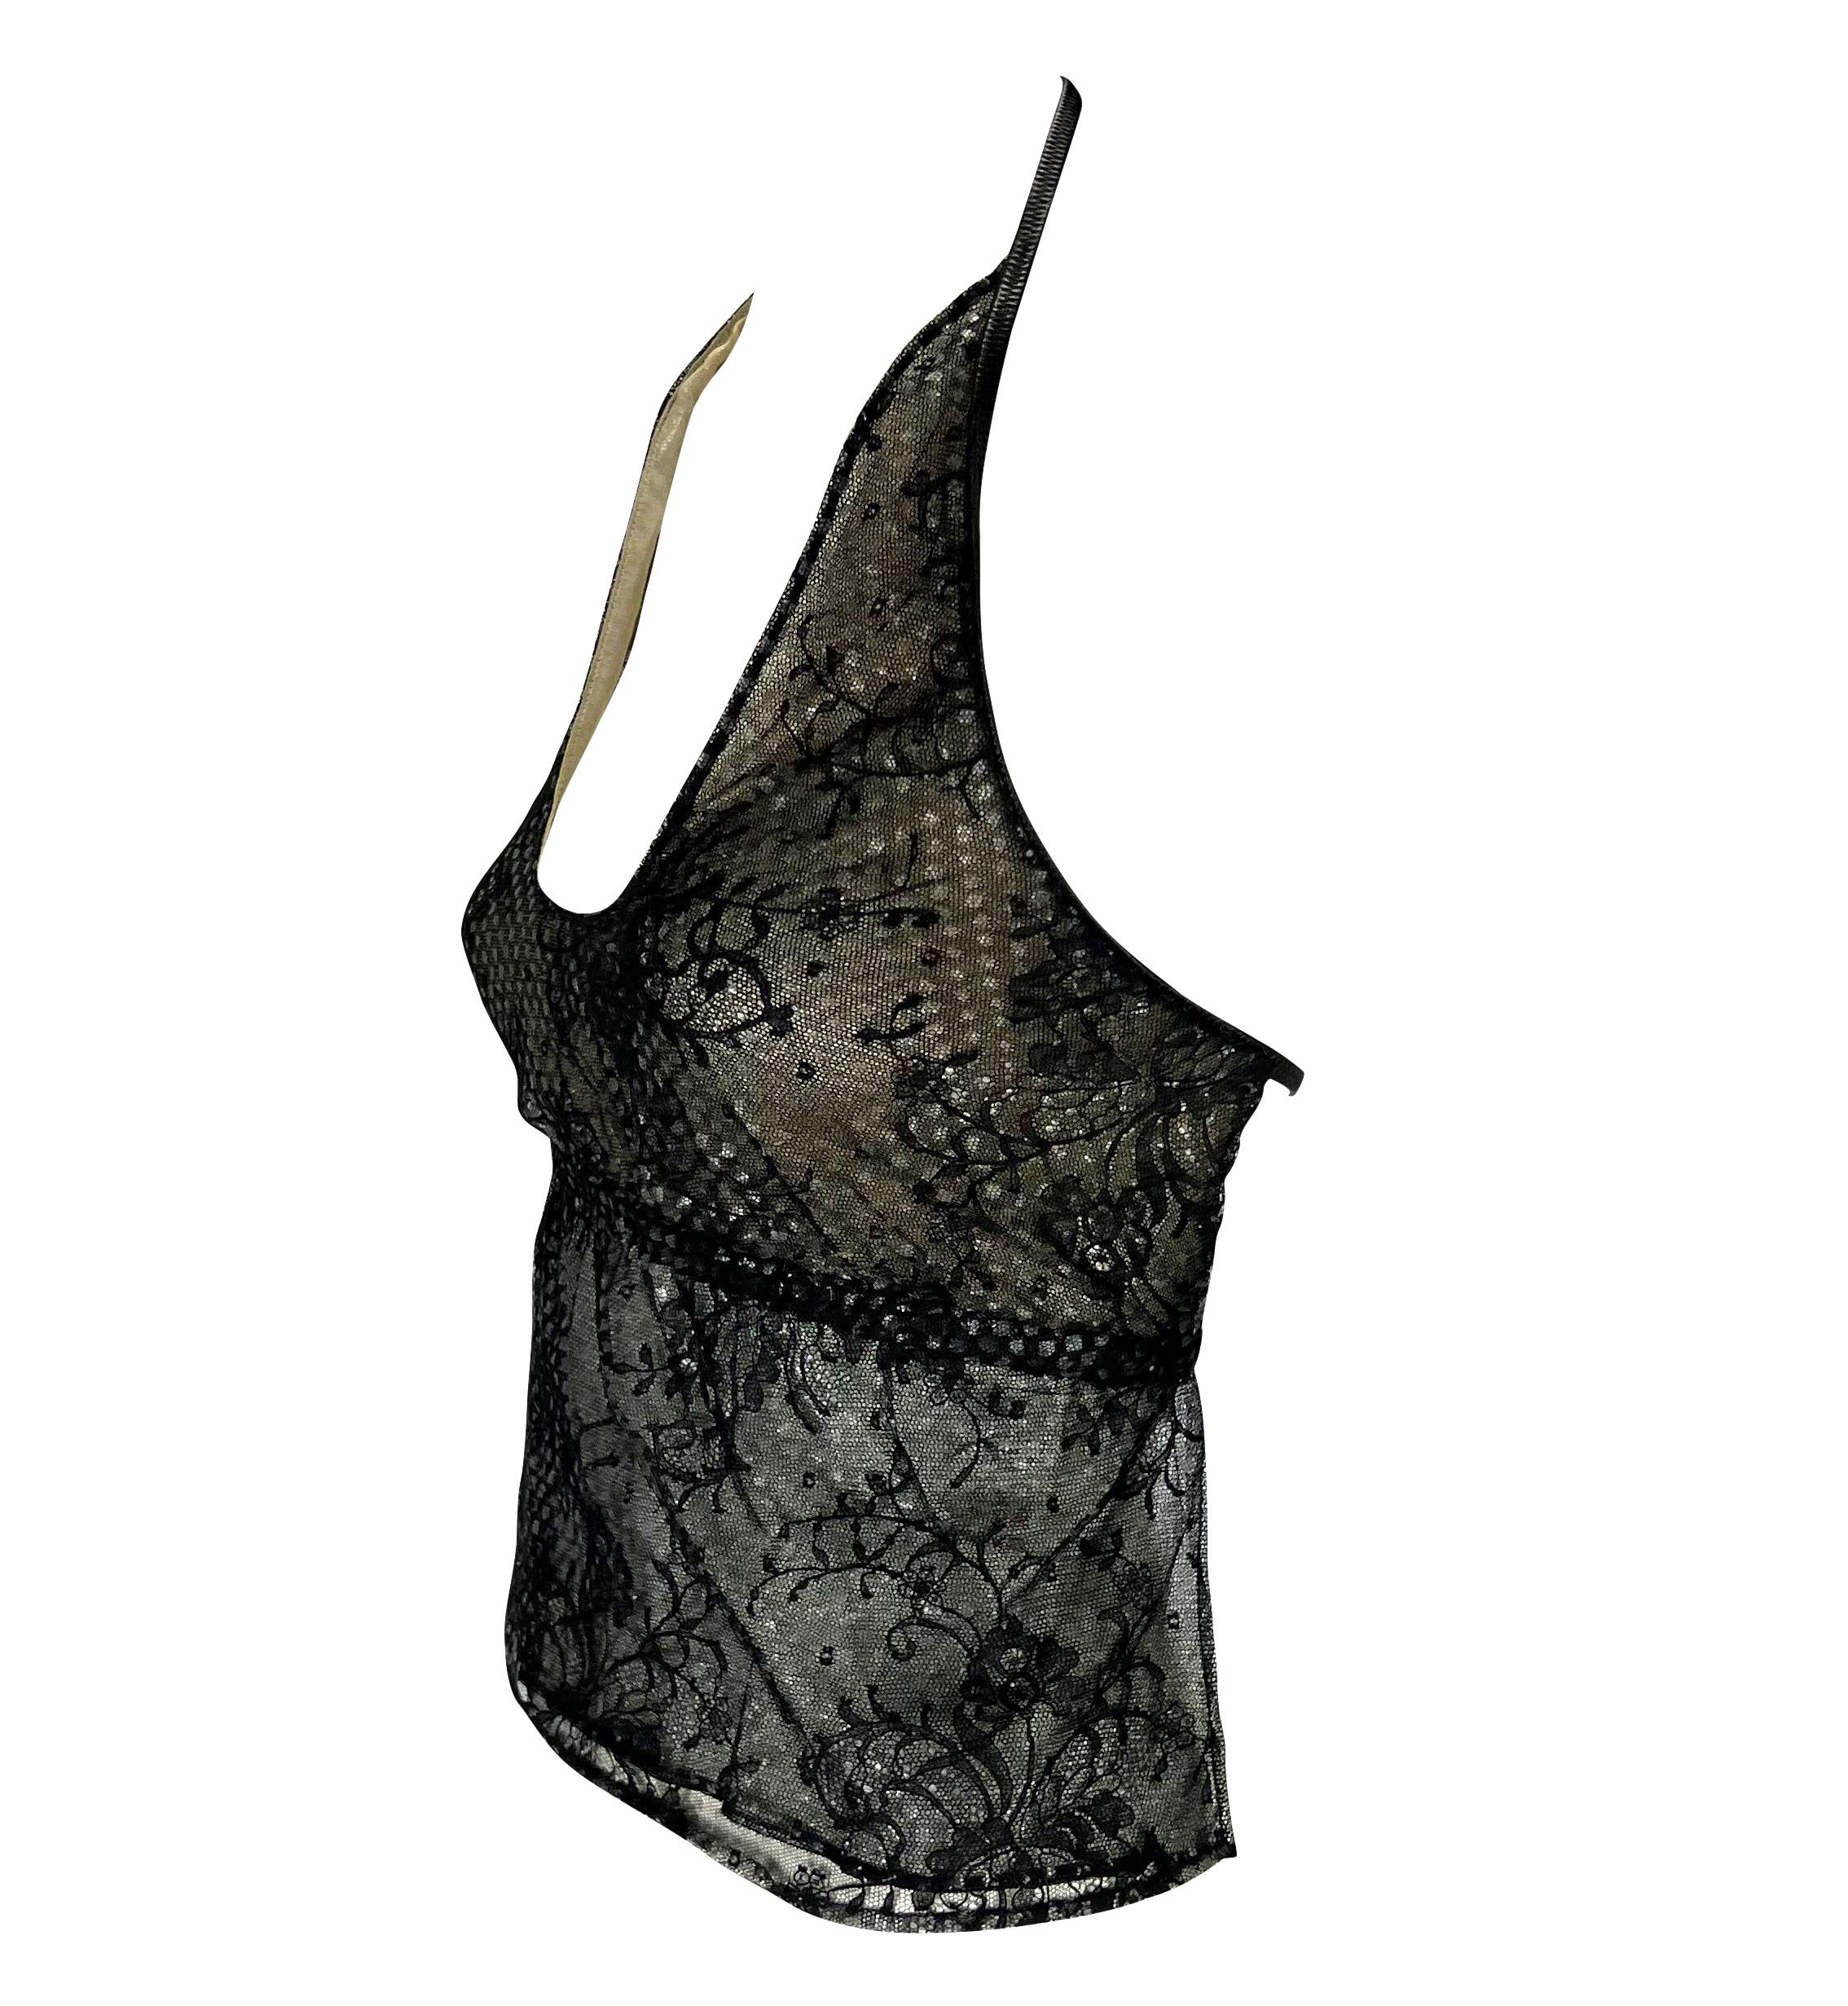 S/S 1999 Gucci by Tom Ford Runway Backless Sheer Floral Lace Leather Crop Top Unisexe en vente